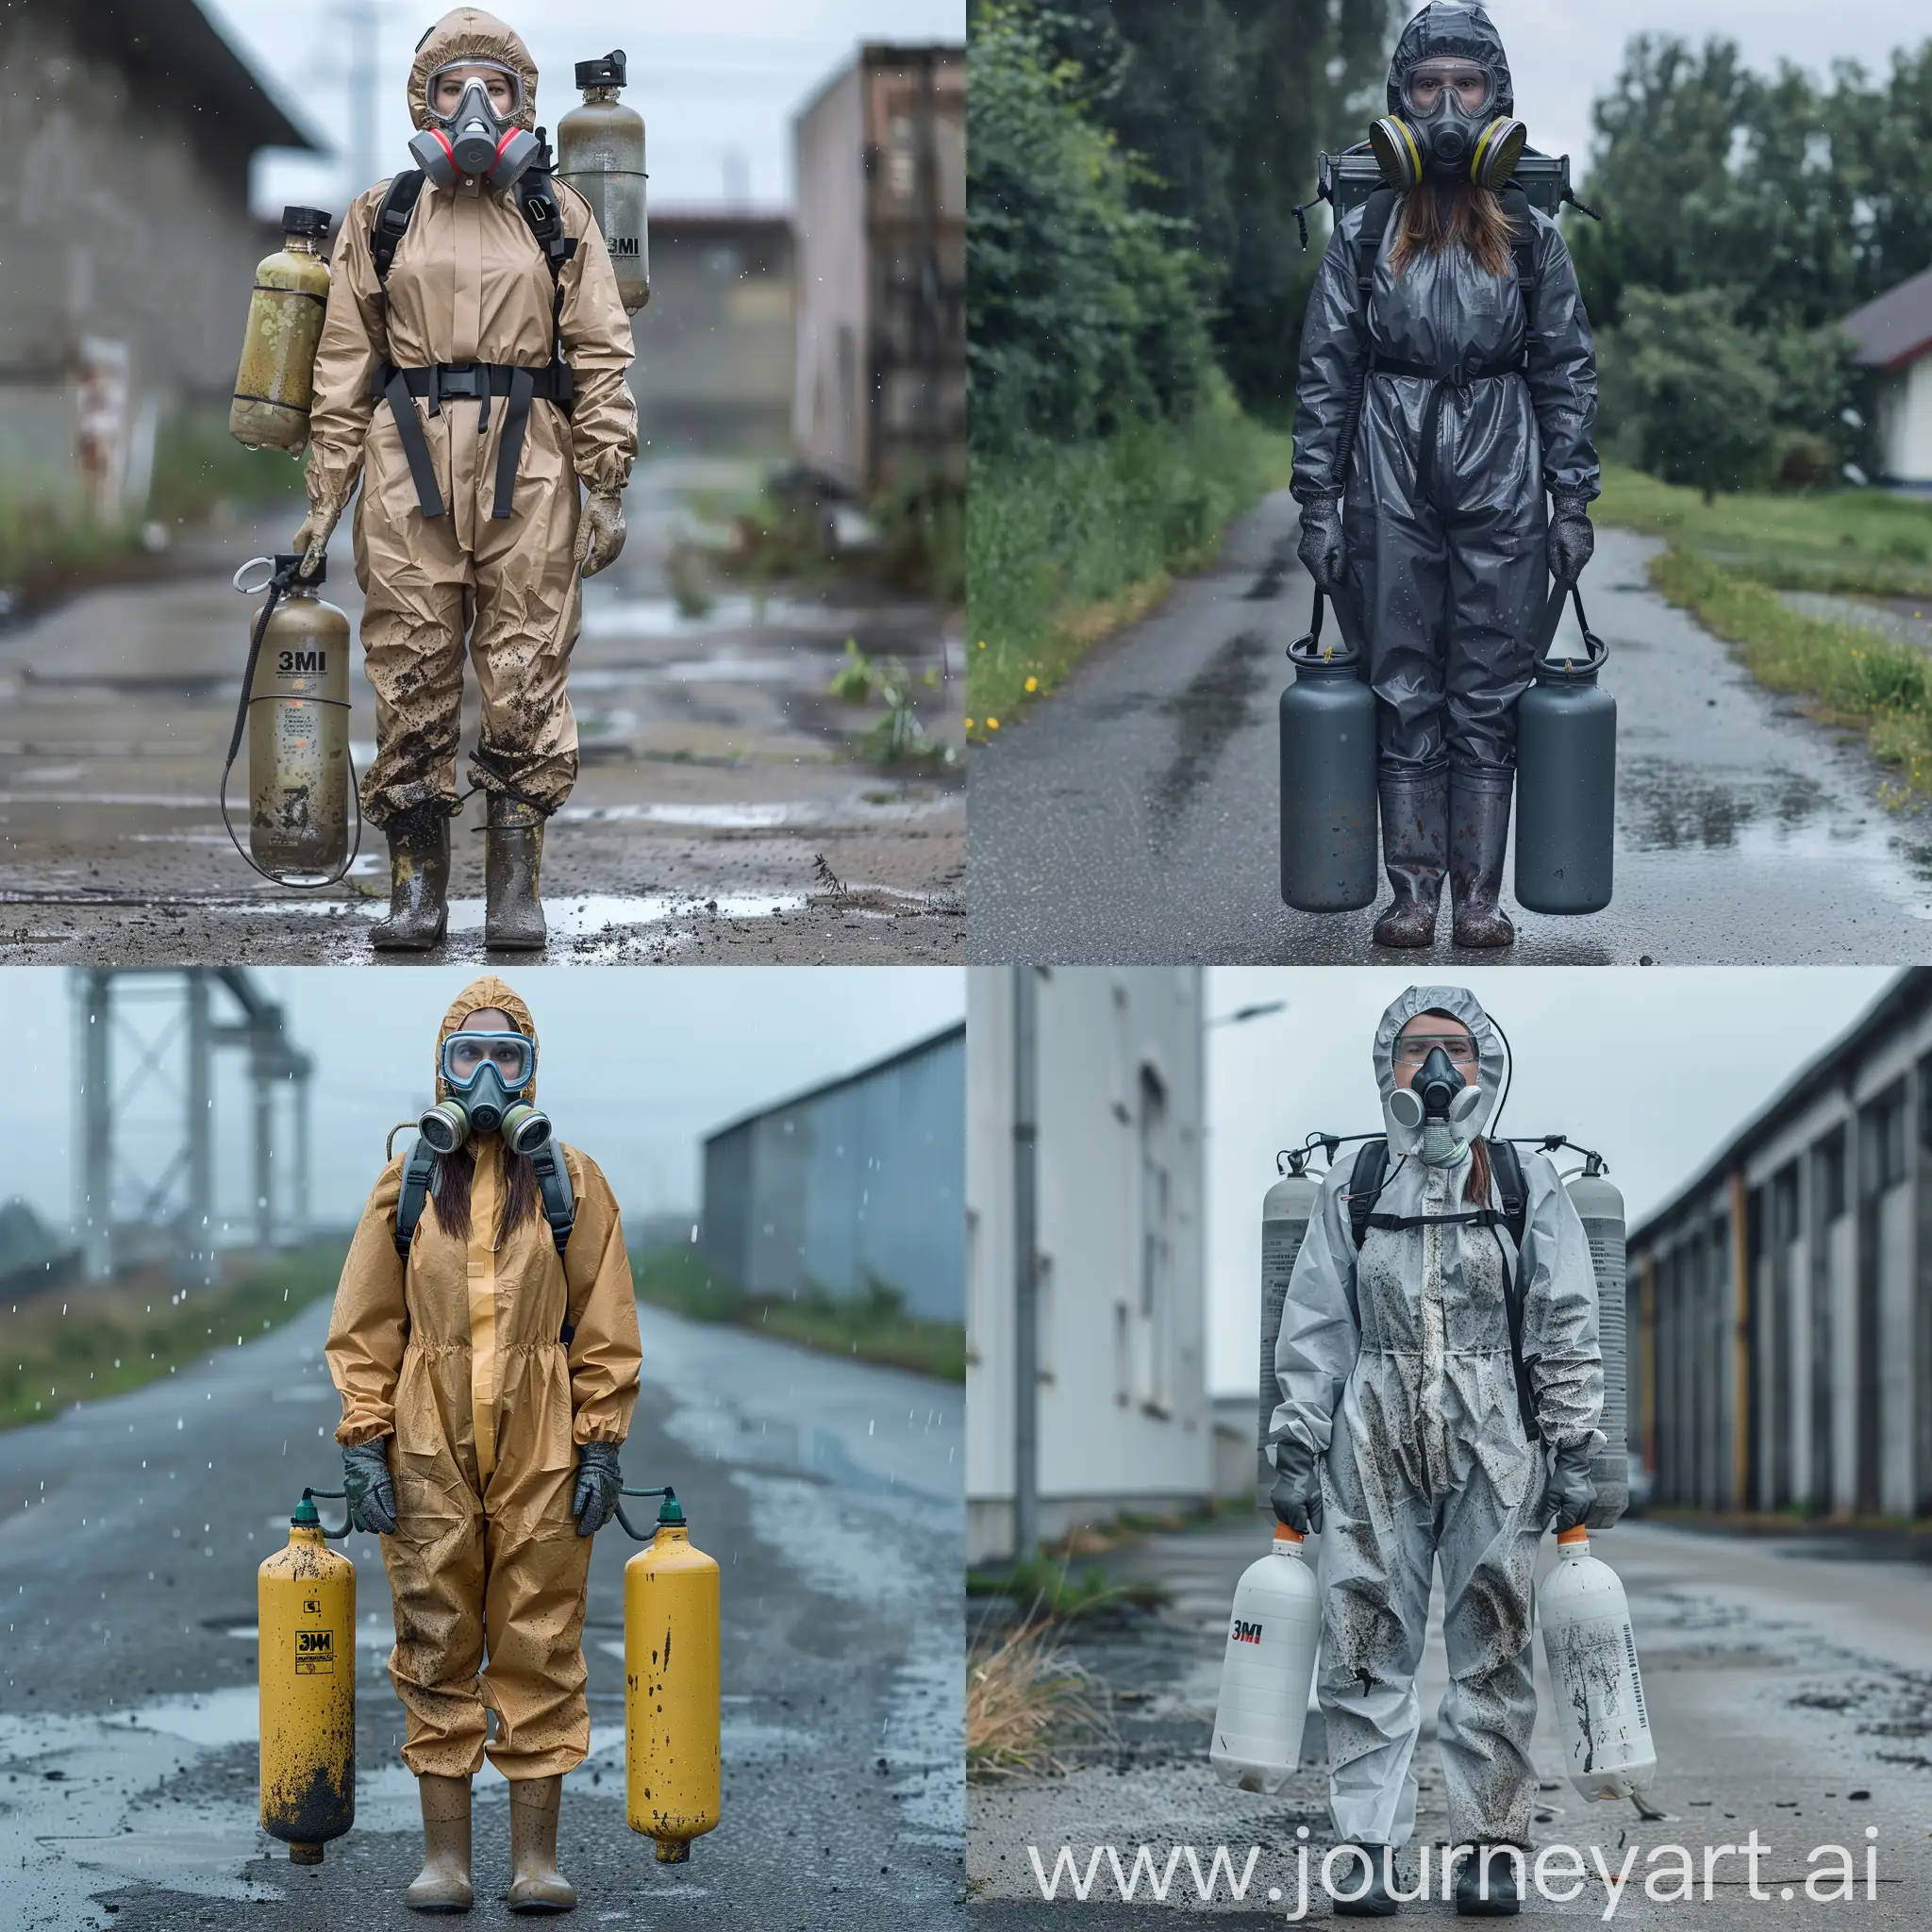 Woman-in-Hazmat-Suit-with-Protective-Gear-on-Rainy-Day-Pavement